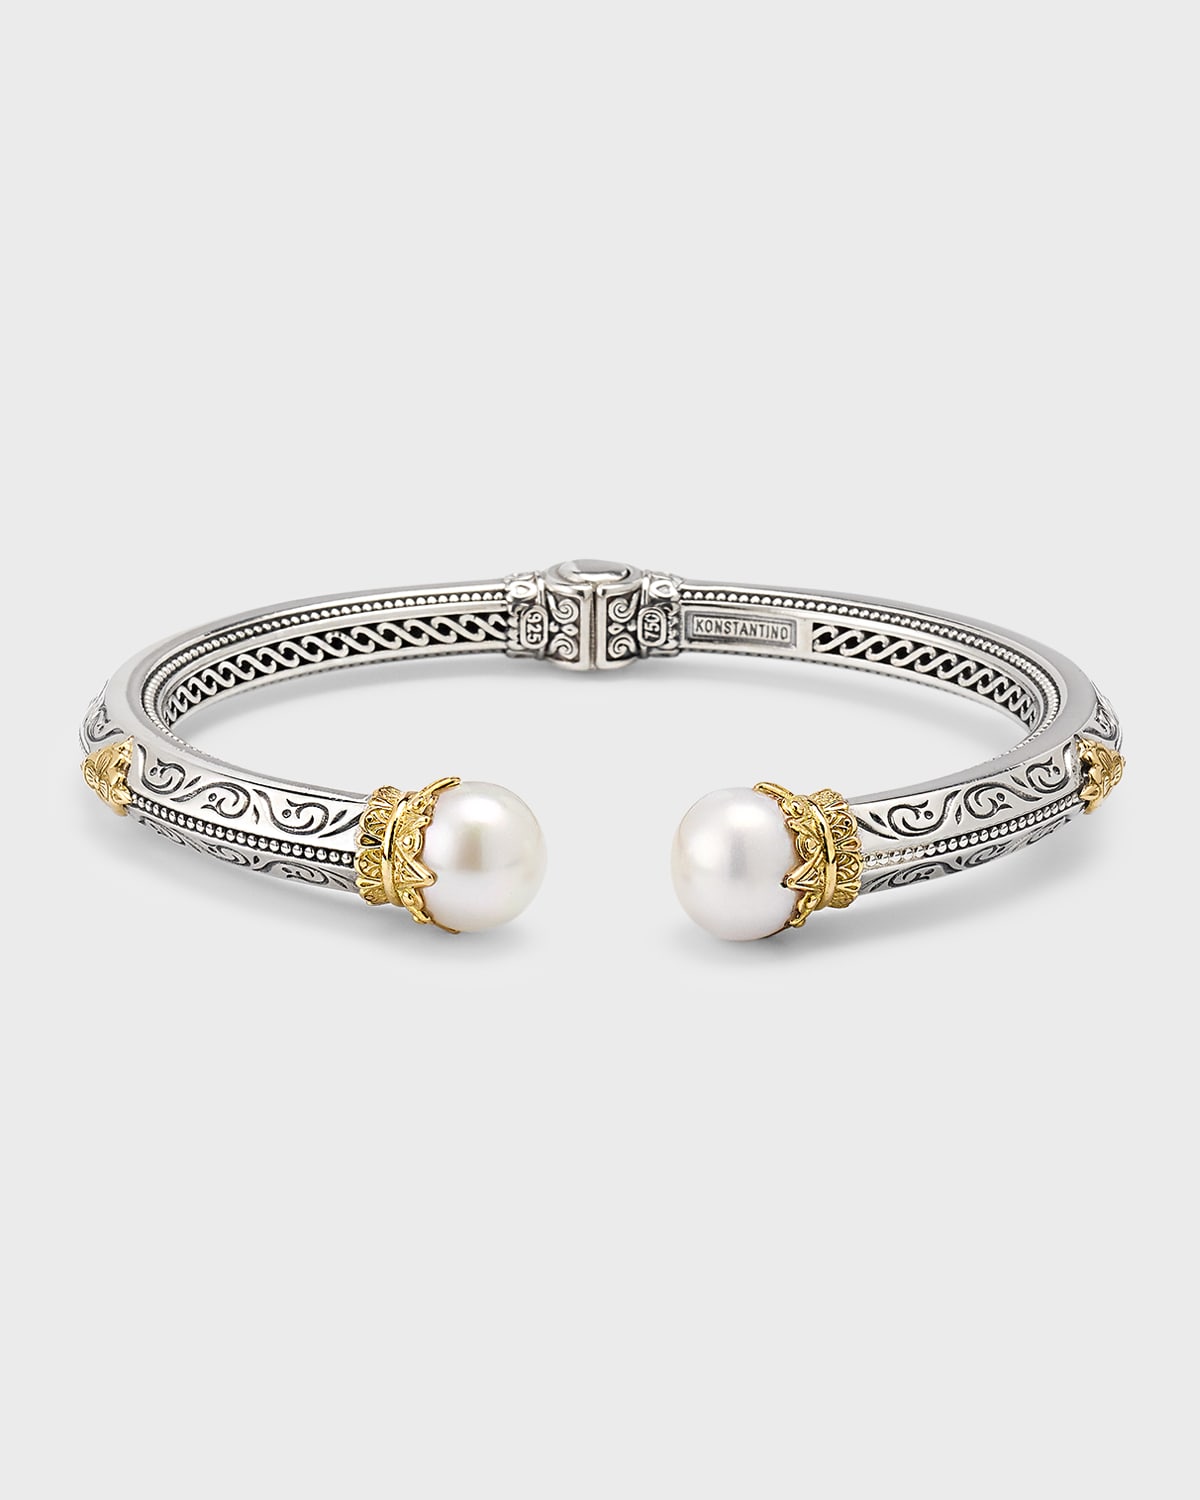 Konstantino Silver And 18k Gold Cuff Bracelet With Pearls In Two Tone